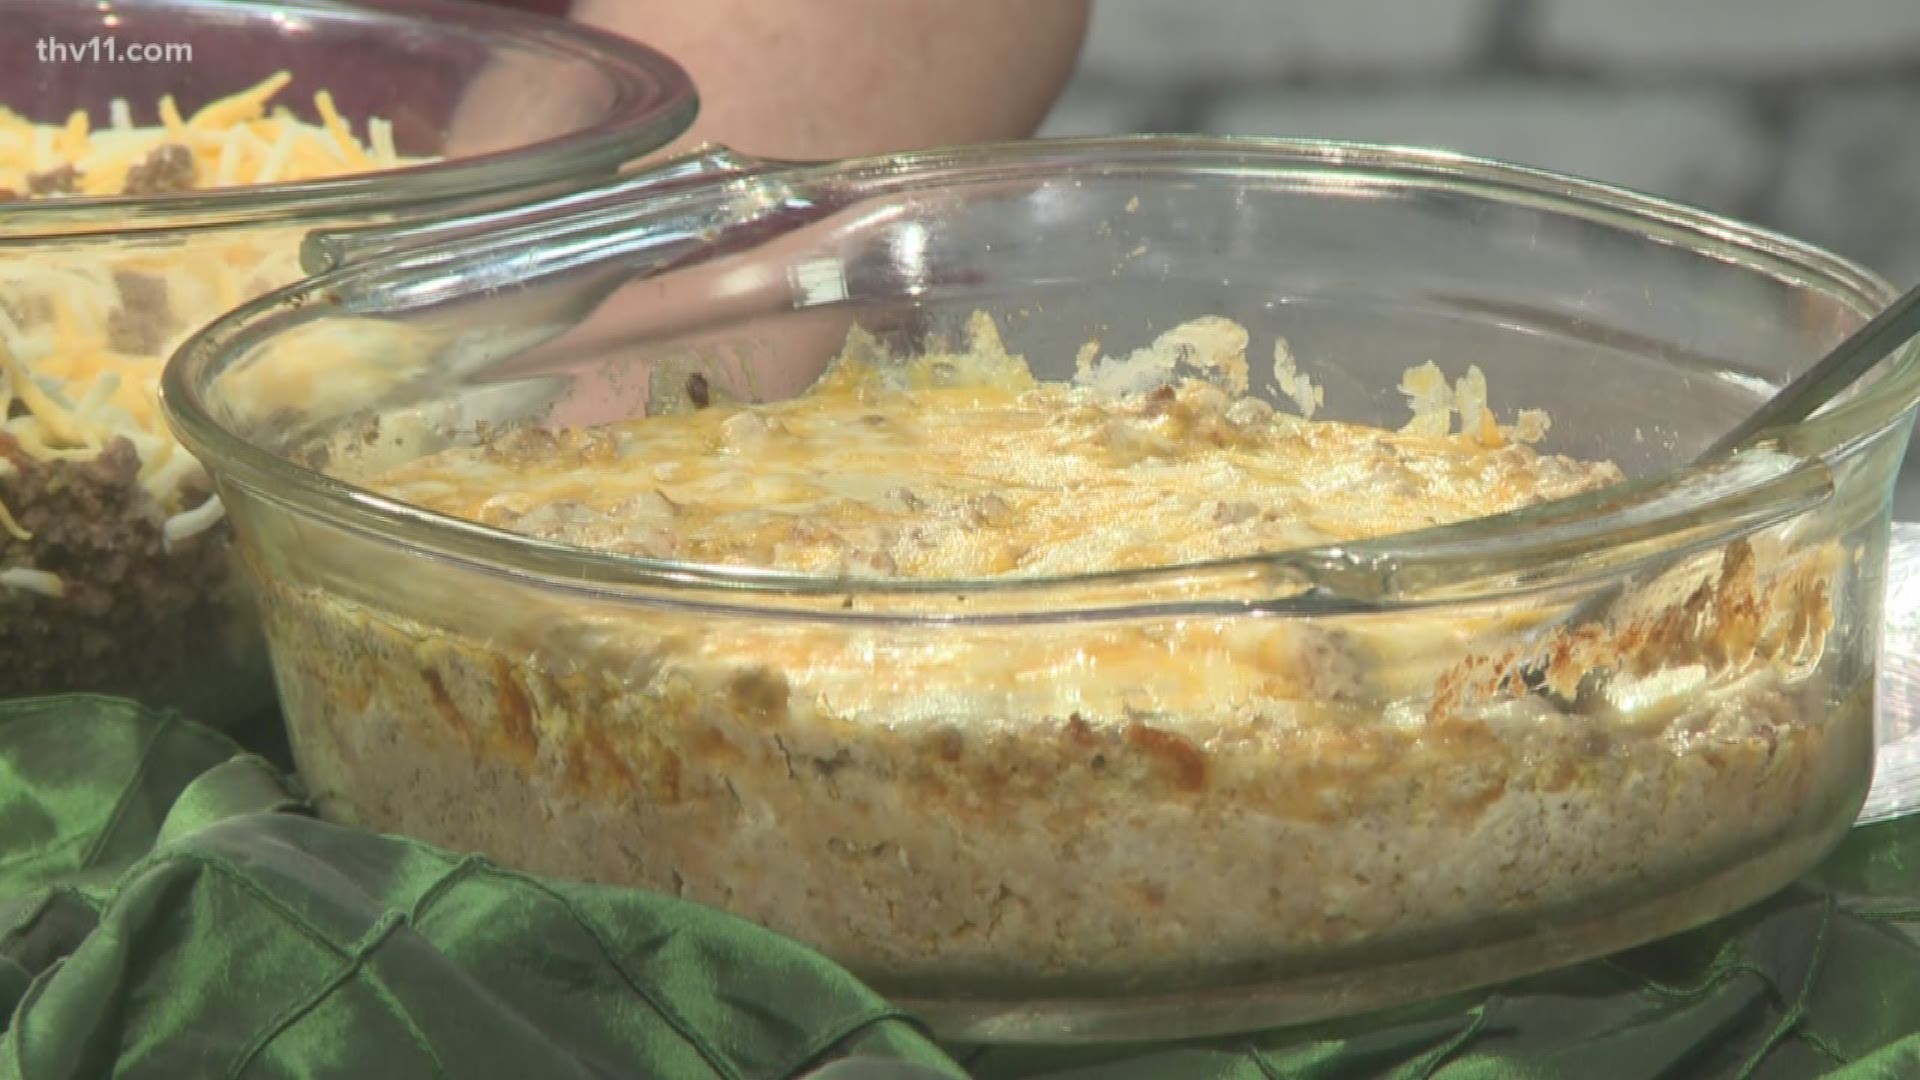 Football season is finally here and you may be looking for some new snacks to try out at tailgate and watch parties. Good news, Deanna Fleming is here with a recipe to try out.